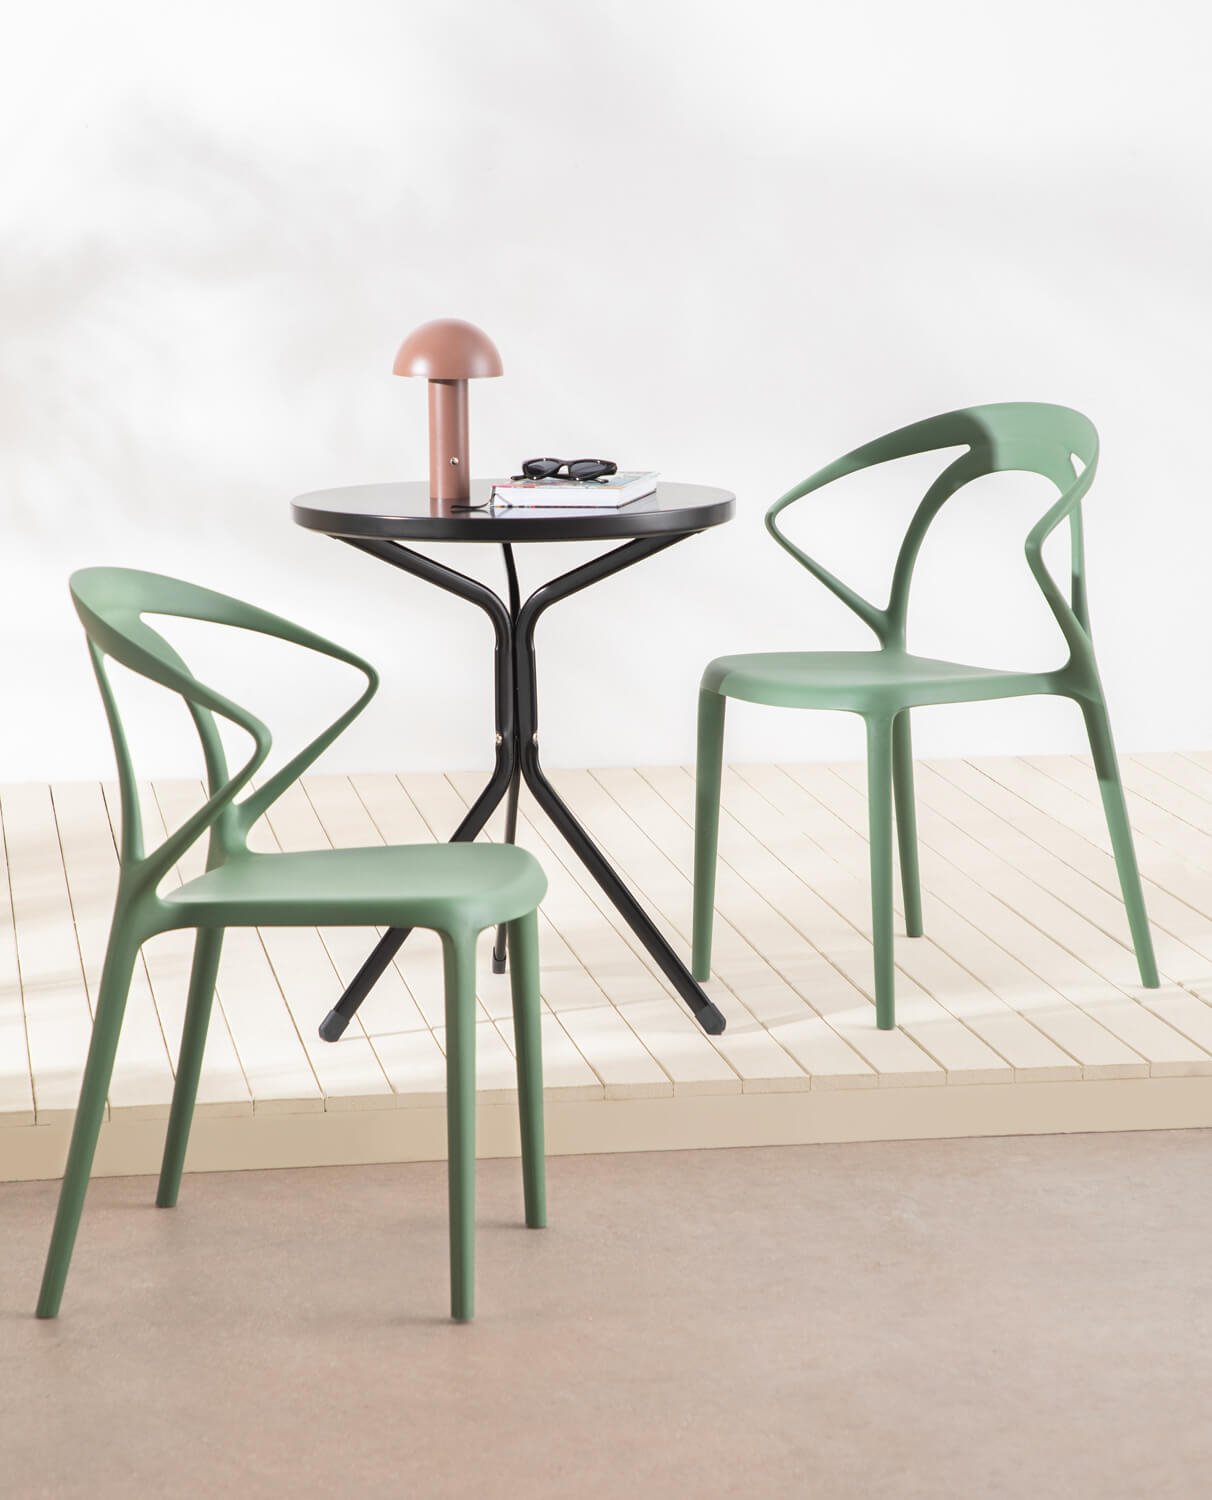 Polypropylene Outdoor Chair Erdy, gallery image 2